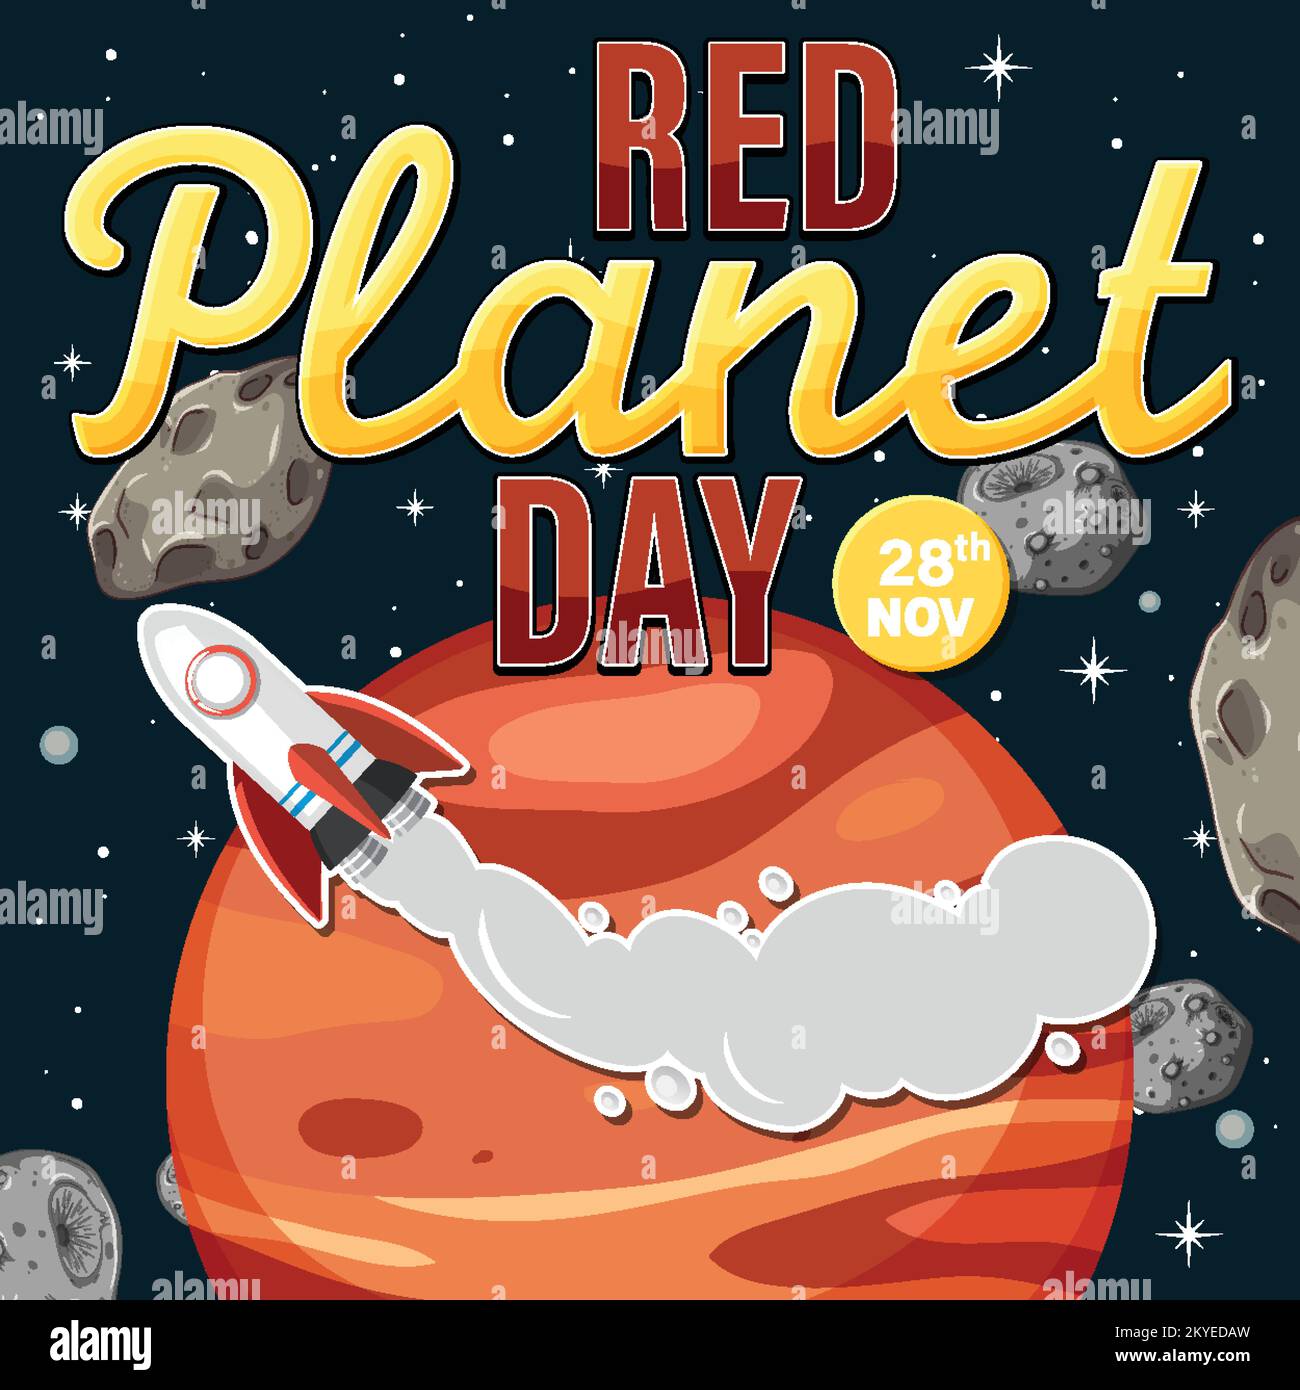 Red planet day poster template illustration Stock Vector